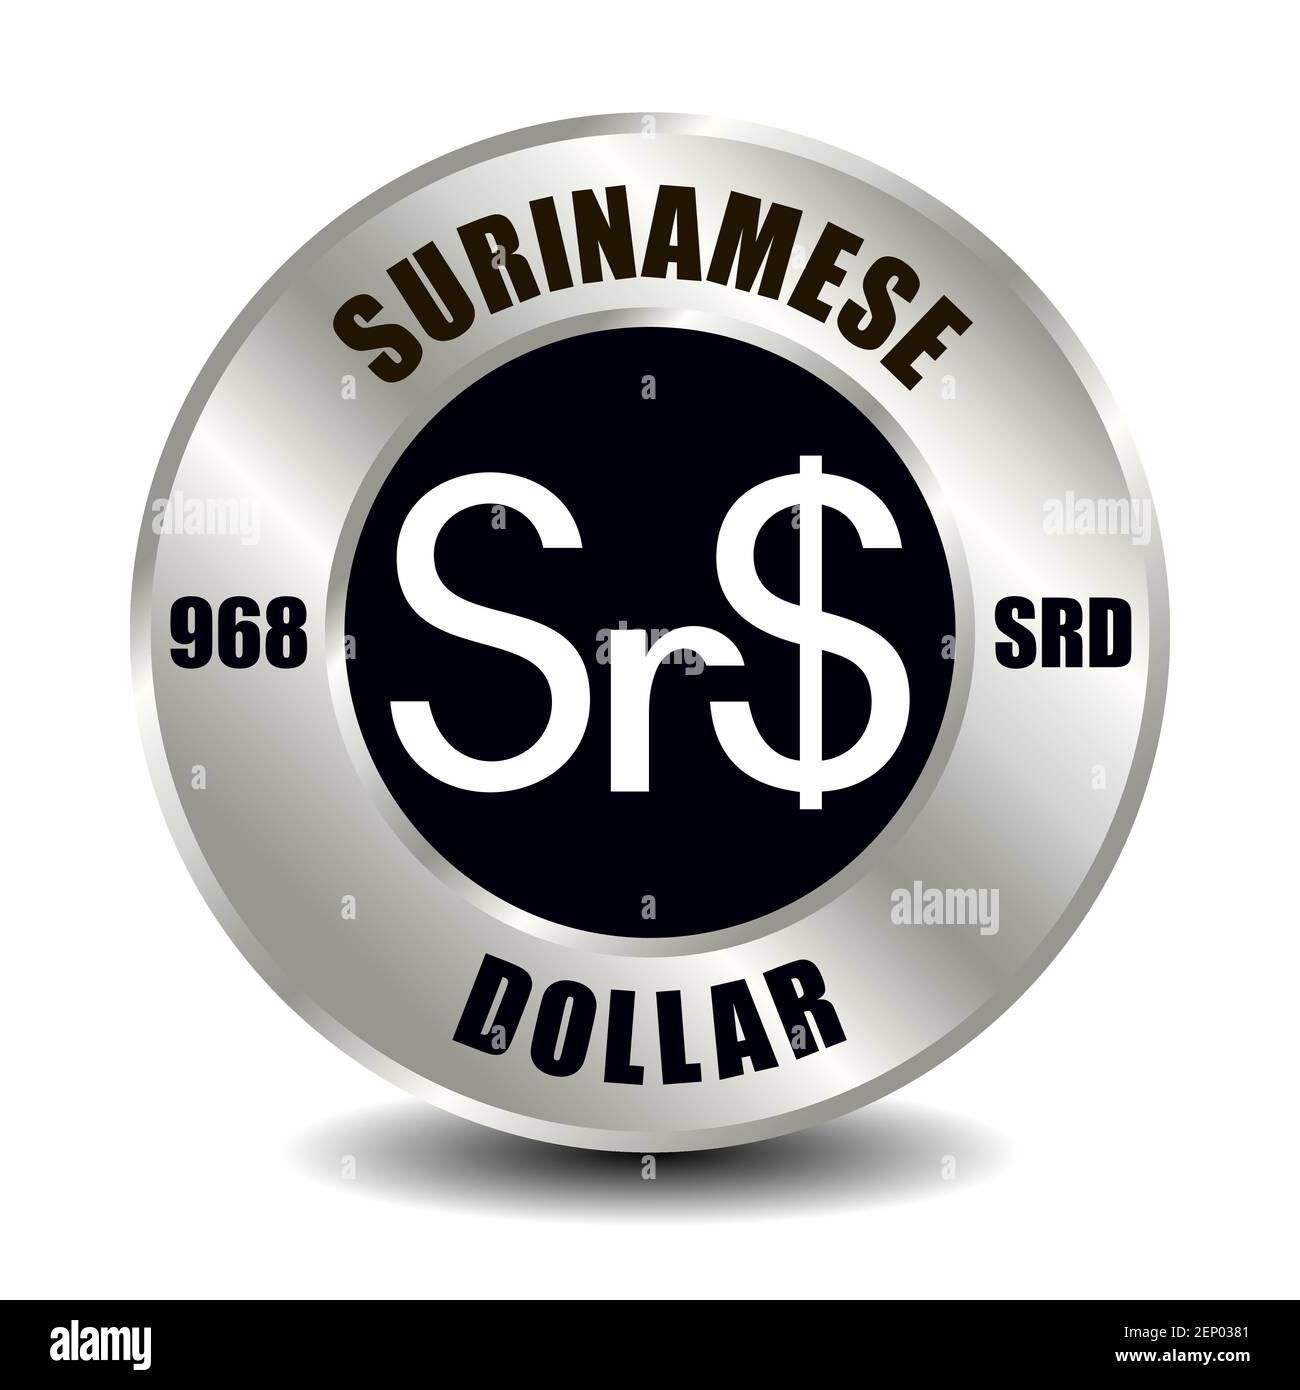 Suriname money icon isolated on round silver coin. Vector sign of currency symbol with international ISO code and abbreviation Stock Vector